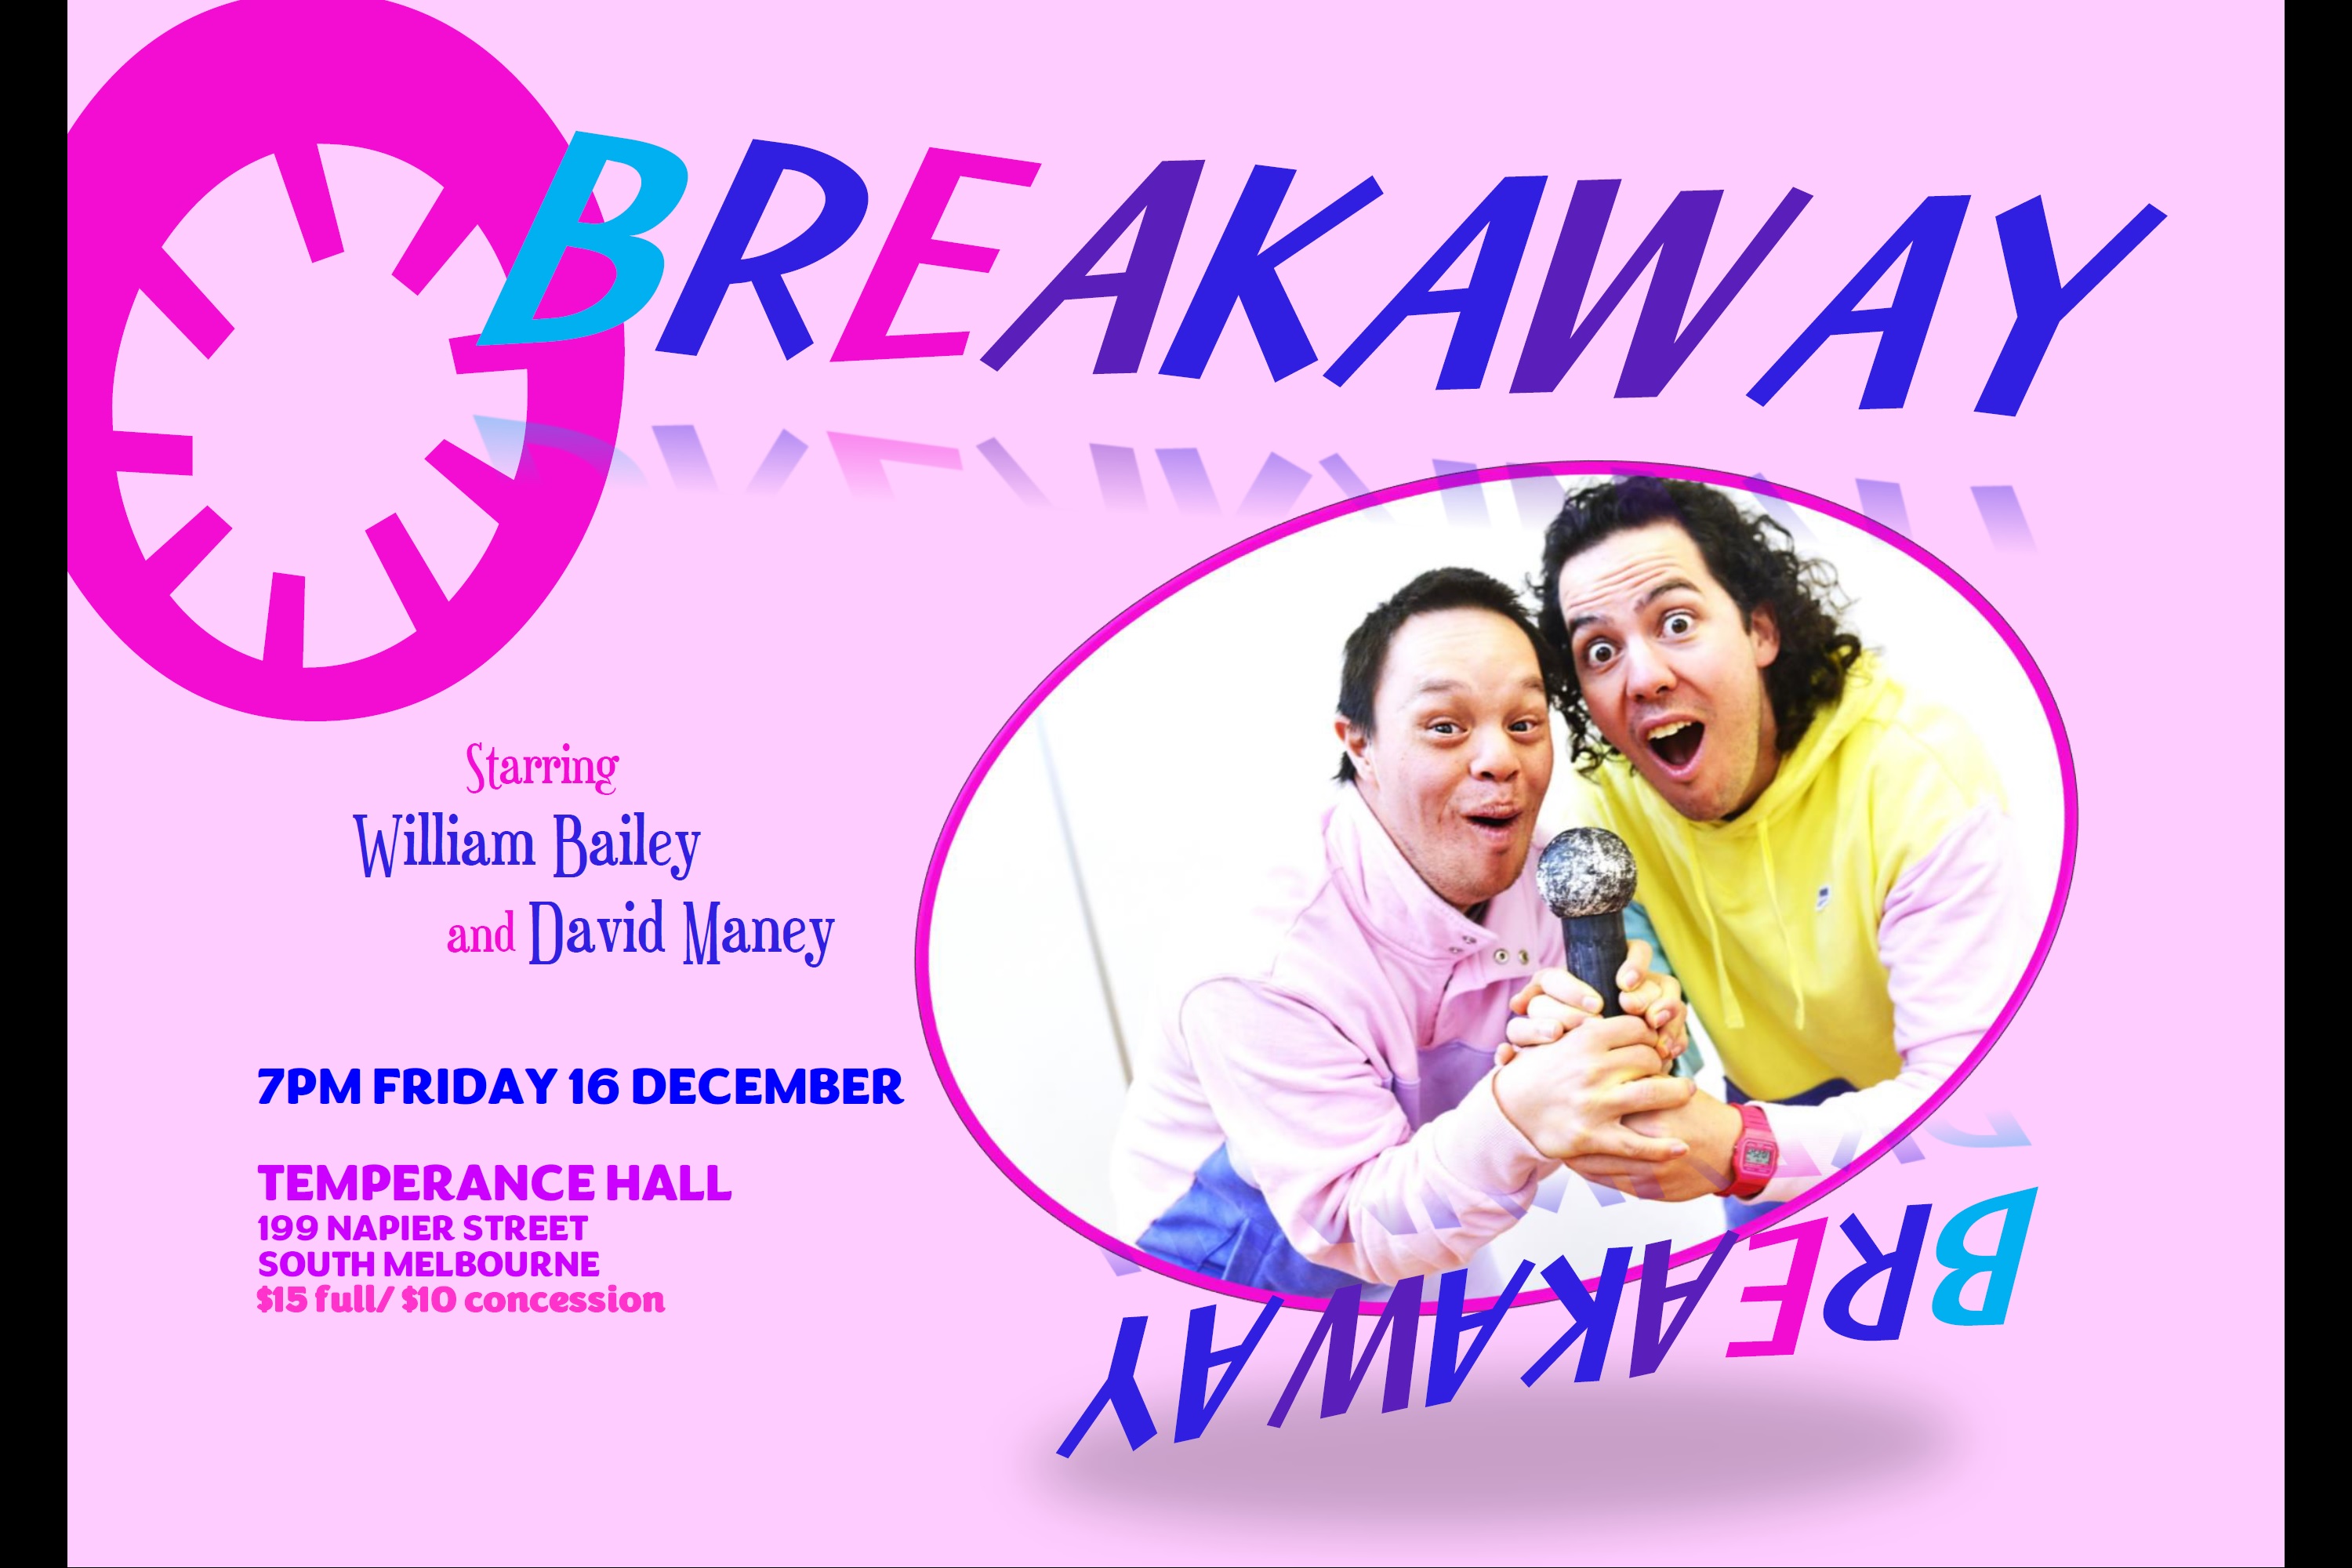 William's Breakaway show poster featuring him and co-performer Dave Maney holding makeshift microphone smiling to camera. The invite has a pink background with title in colourful bold caps above them, and with show details- 7pm Friday 16 Dec, Temperance Hall, 199 Napier St South Melb and ticket prices $15 full, $10 concession. Photo by David de Roach.